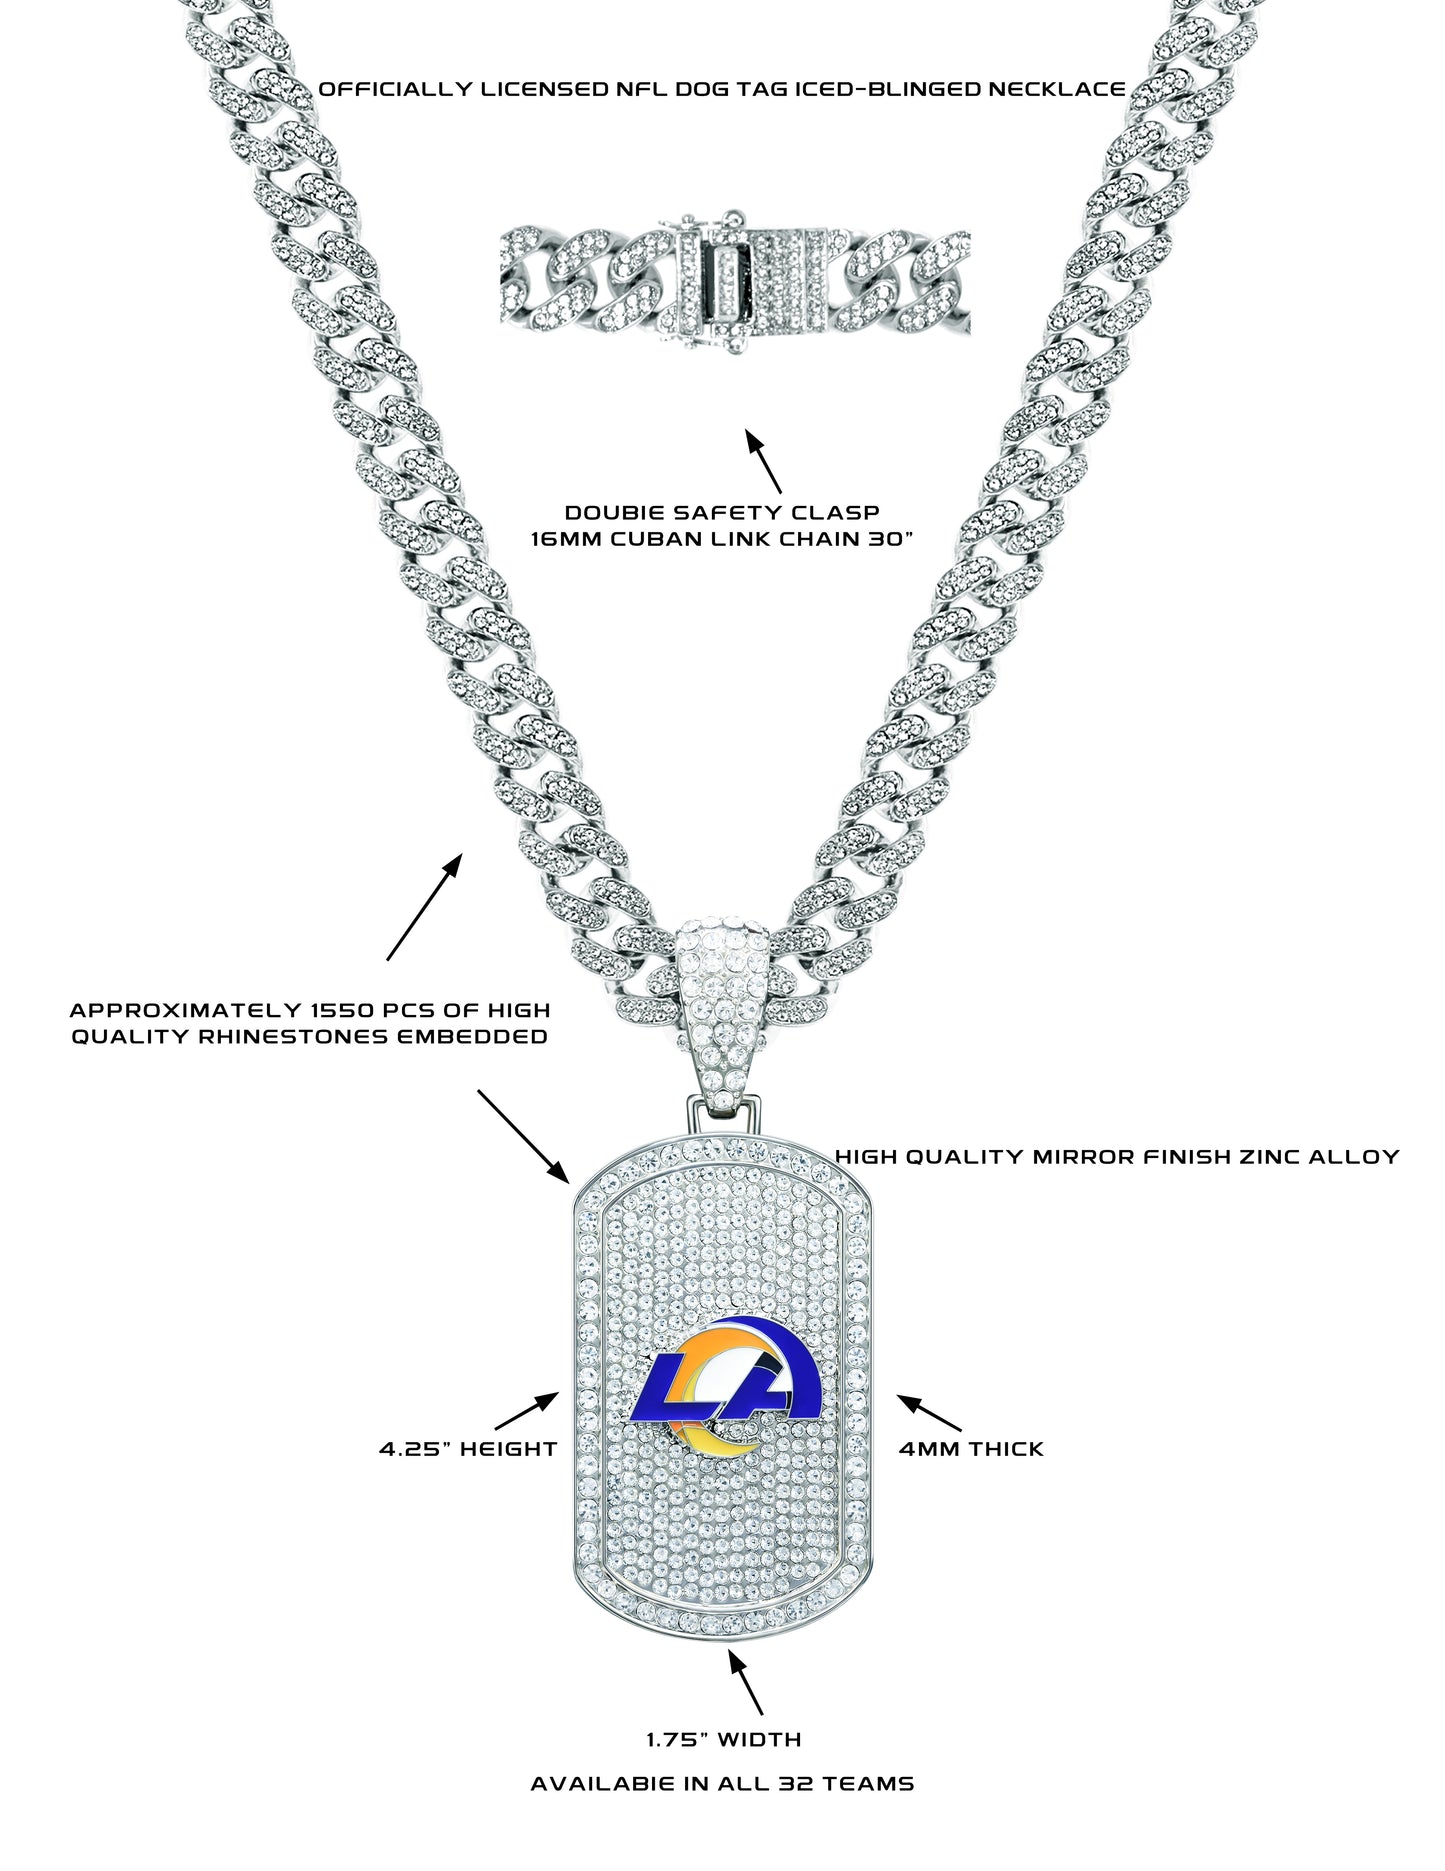 LOS ANGELES RAMS BLING DOG TAG NECKLACE